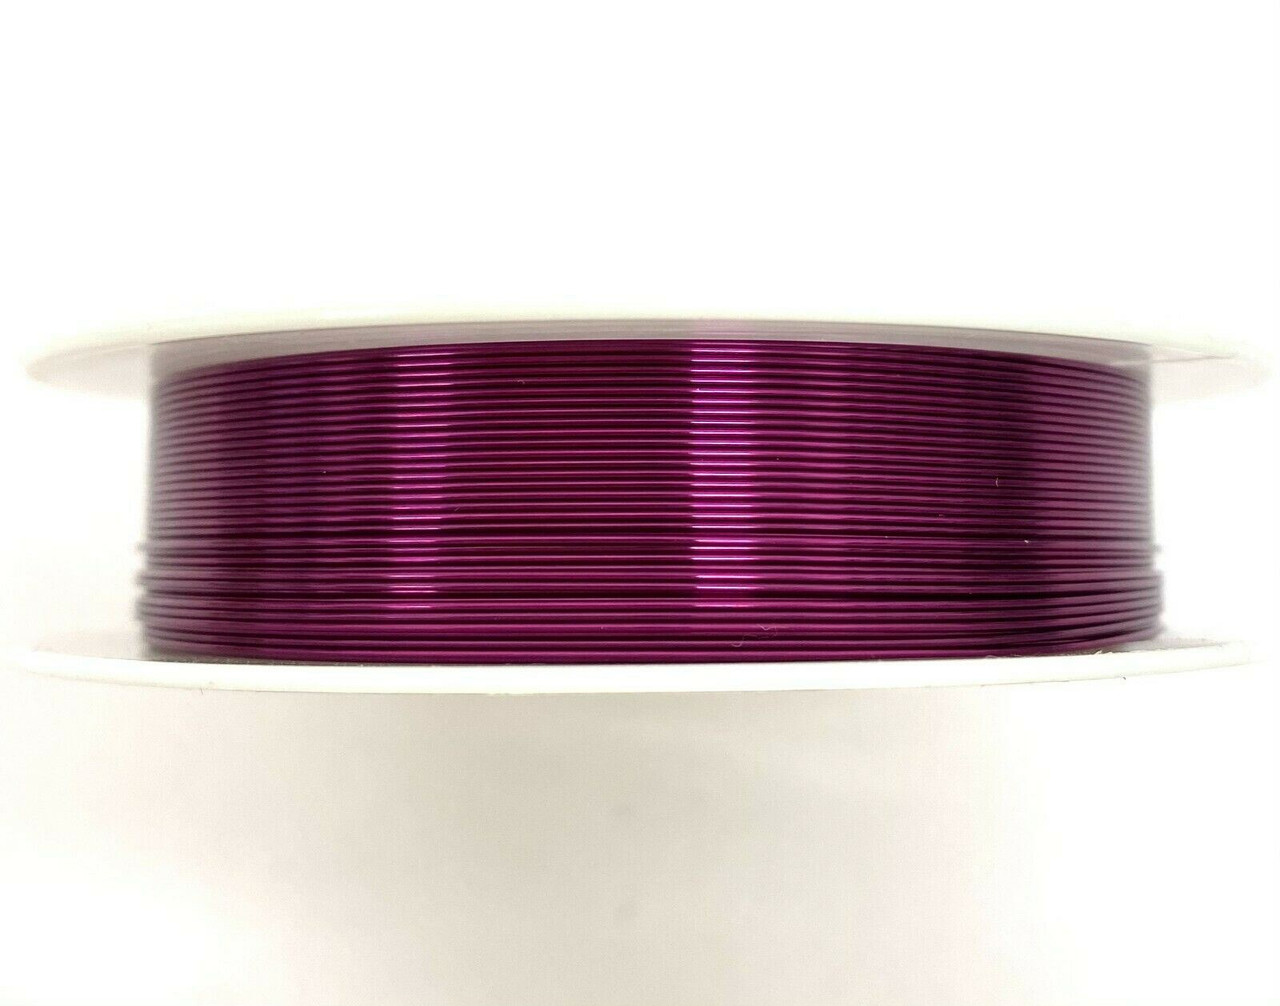 Roll of Copper Wire, 0.3mm thickness, PLUM colour, approx 26m length